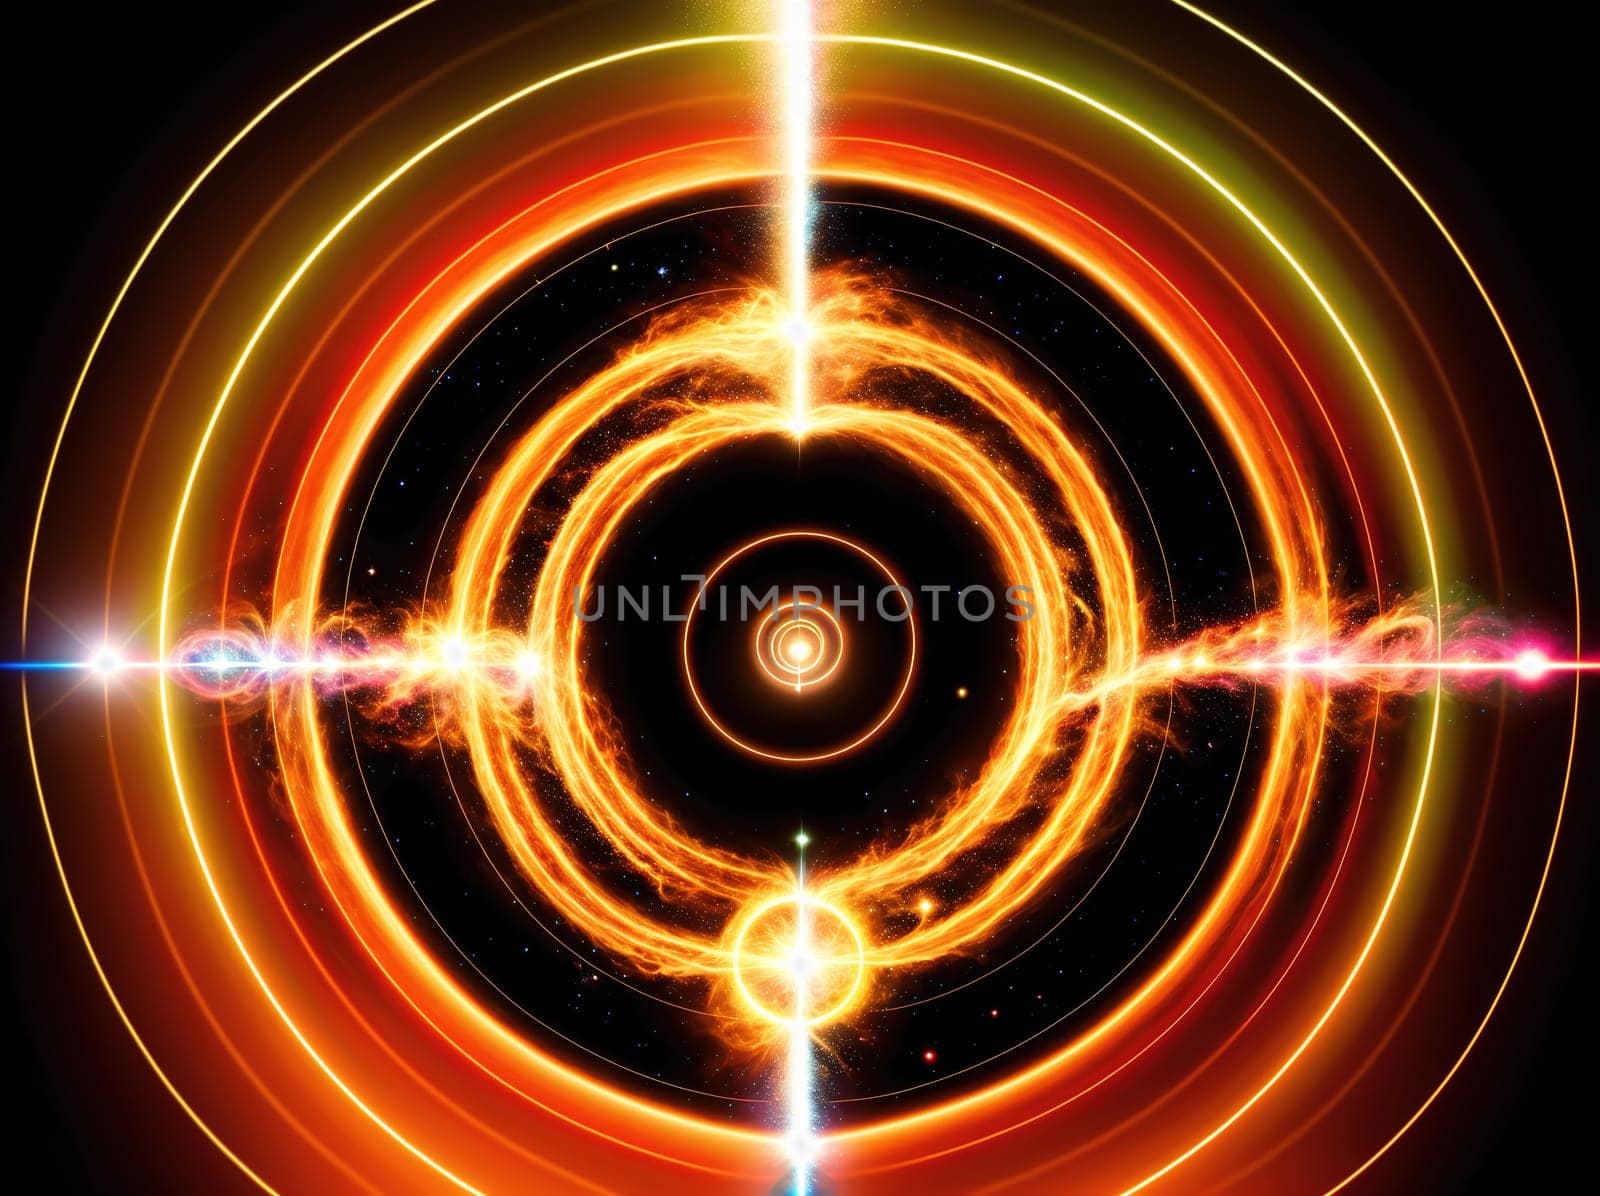 The image is a stylized representation of a spiral galaxy with vibrant, swirling colors.